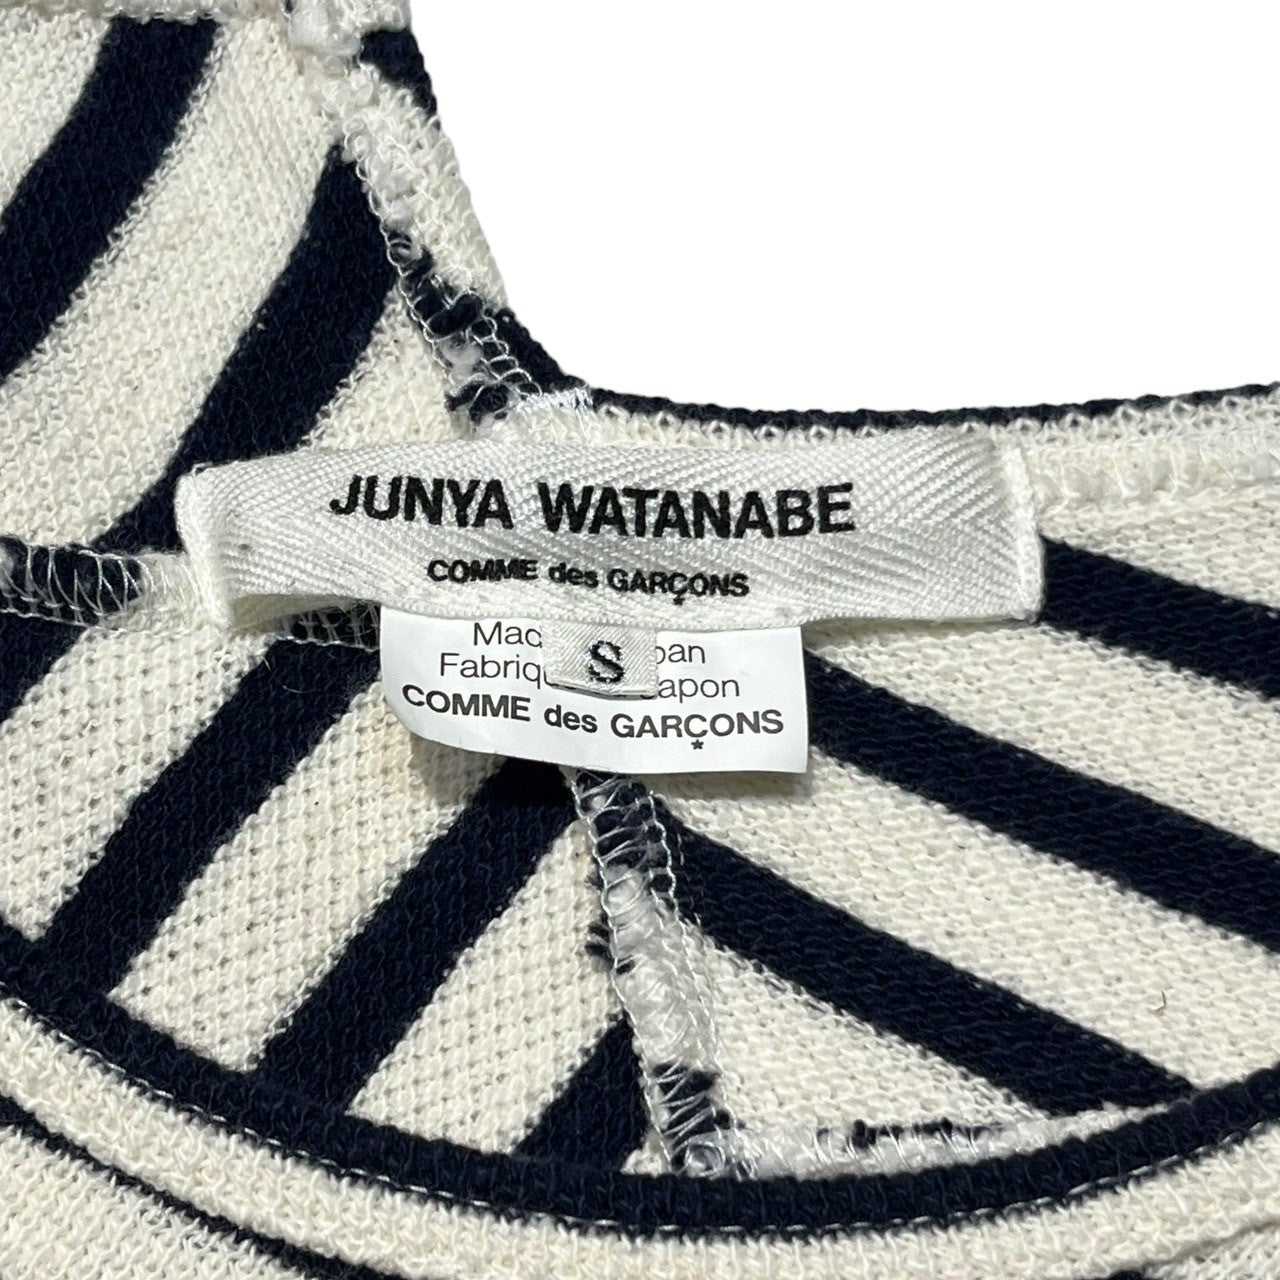 COMME des GARCONS JUNYA WATANABE(コムデギャルソンジュンヤワタナベ) 13AW  Bias border cotton knit/cut and sew バイアス ボーダー コットン ニット カットソー 長袖 JL-T002 SIZE S